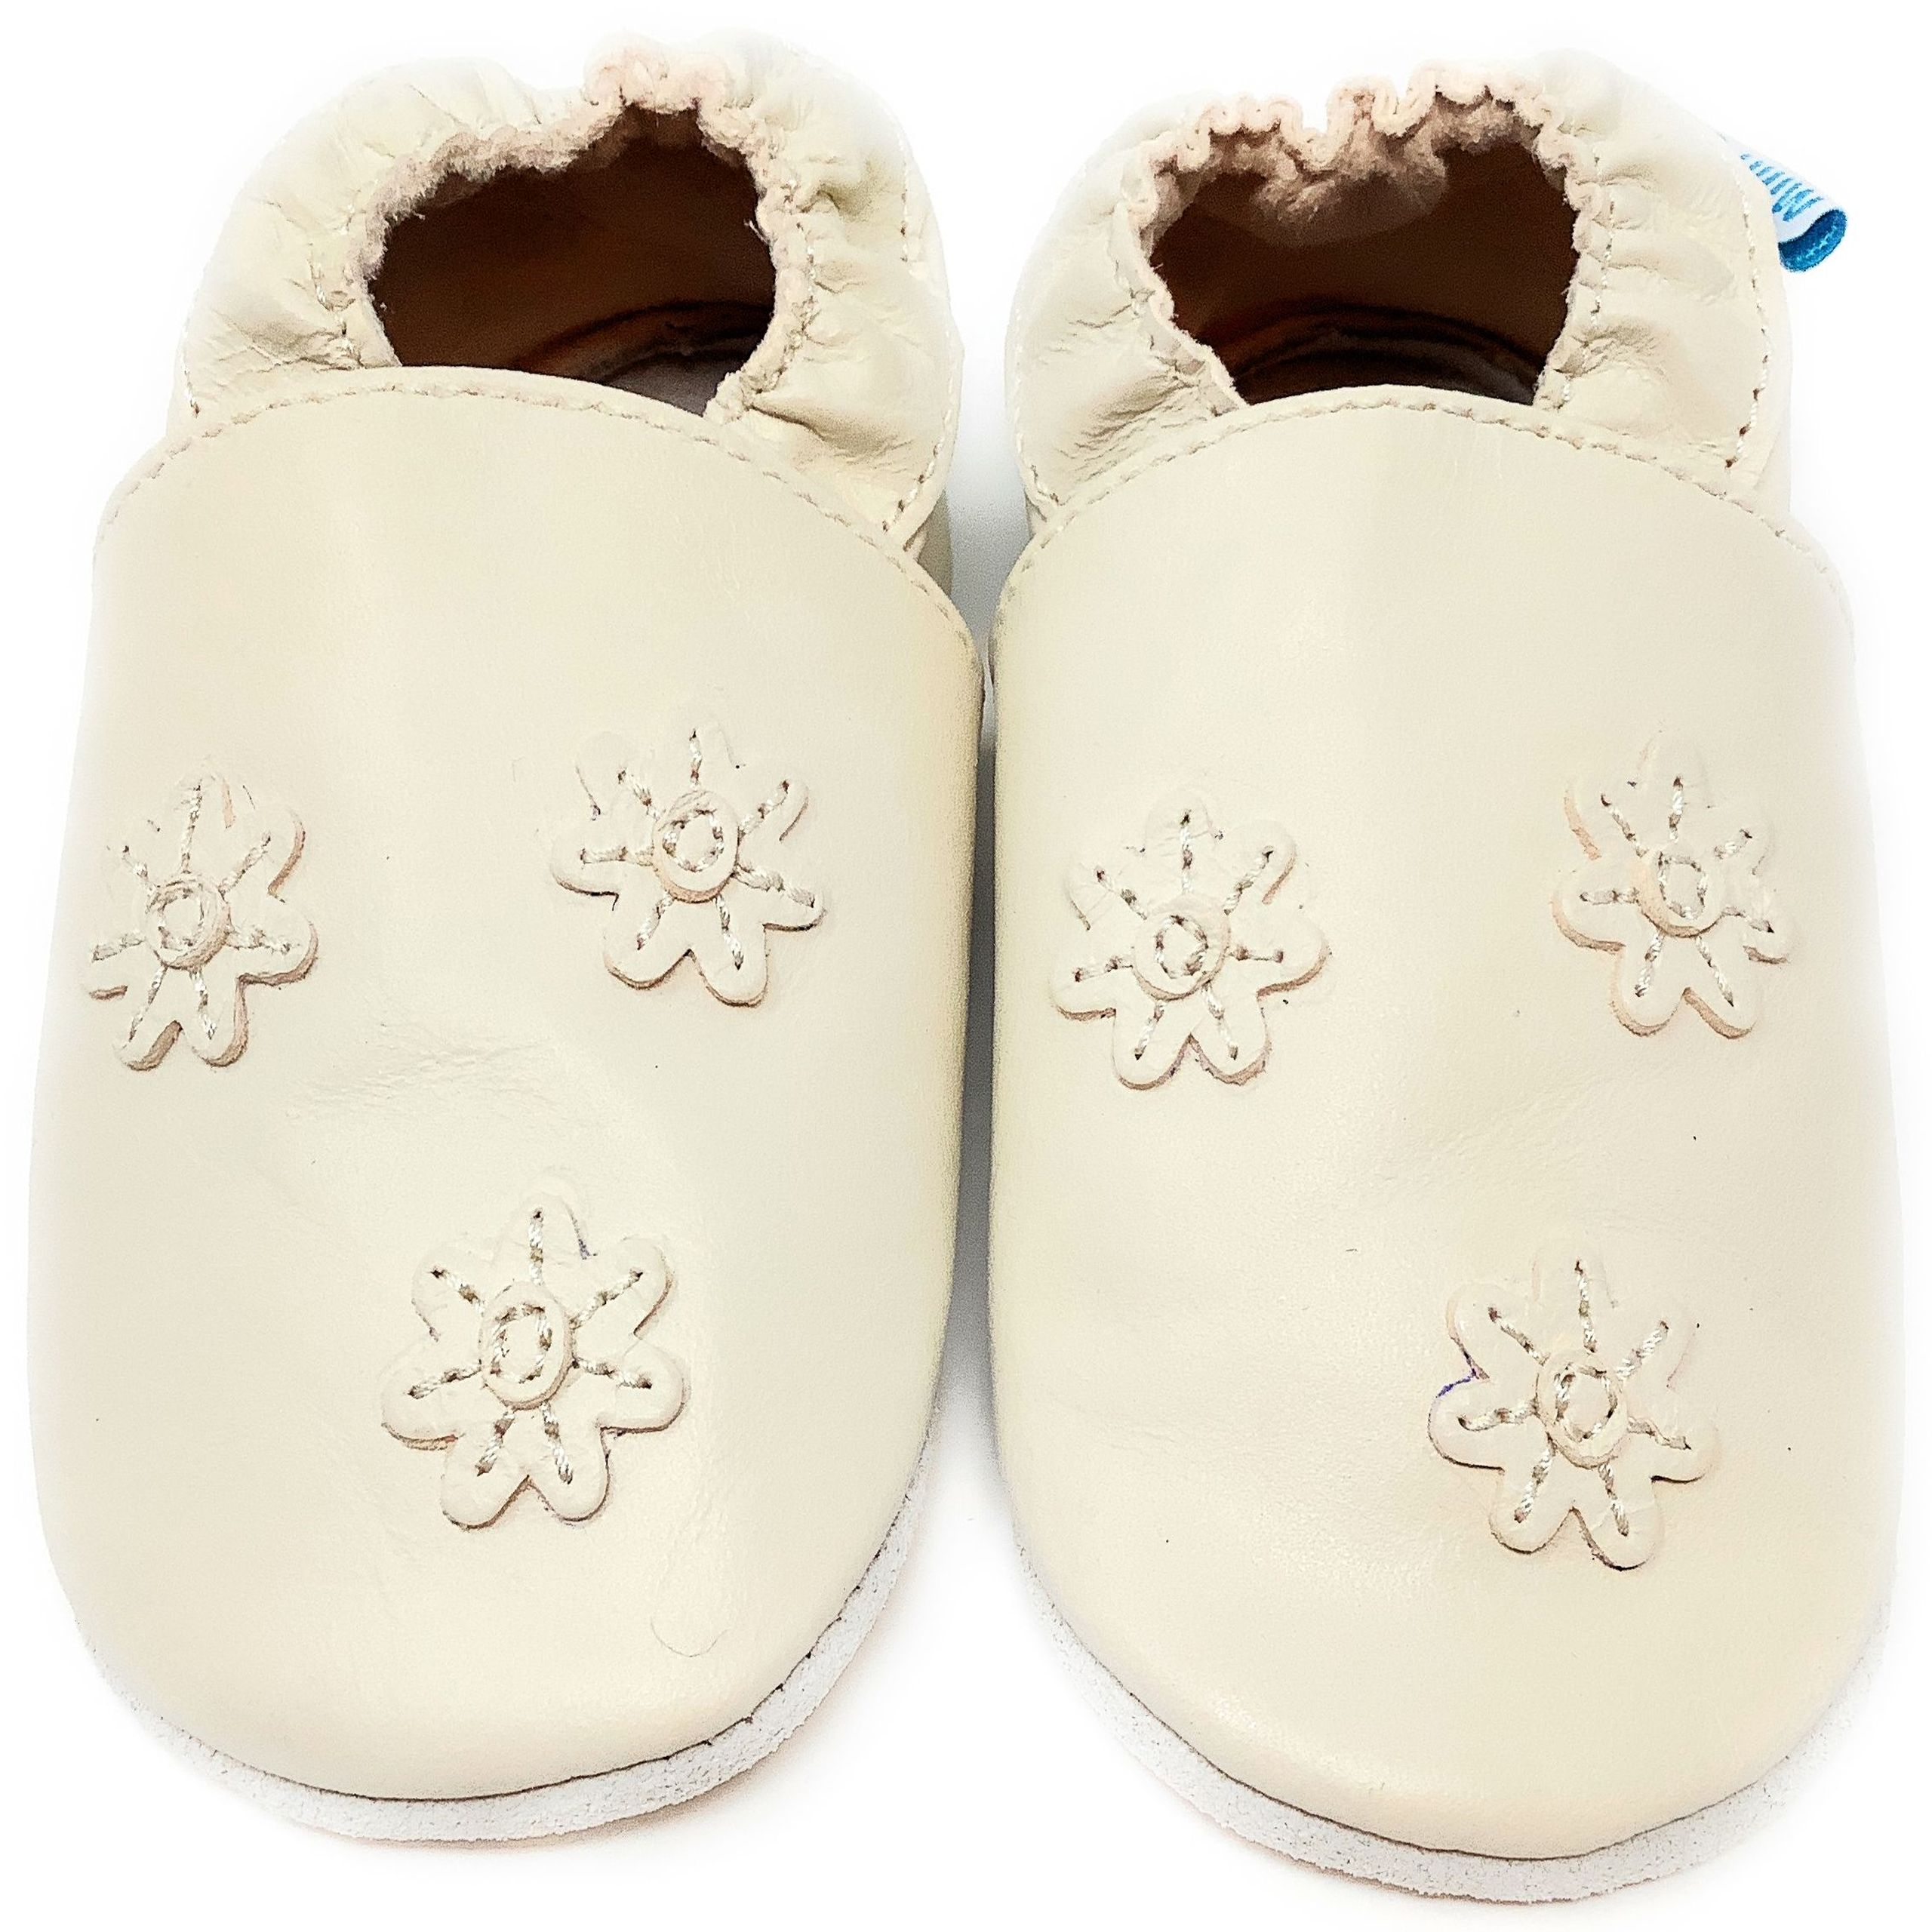 PRAM SHOES 0-6,6-12,12-18,18-24 MTH & 2-3 YRS MINIFEET SOFT LEATHER BABY SHOES 